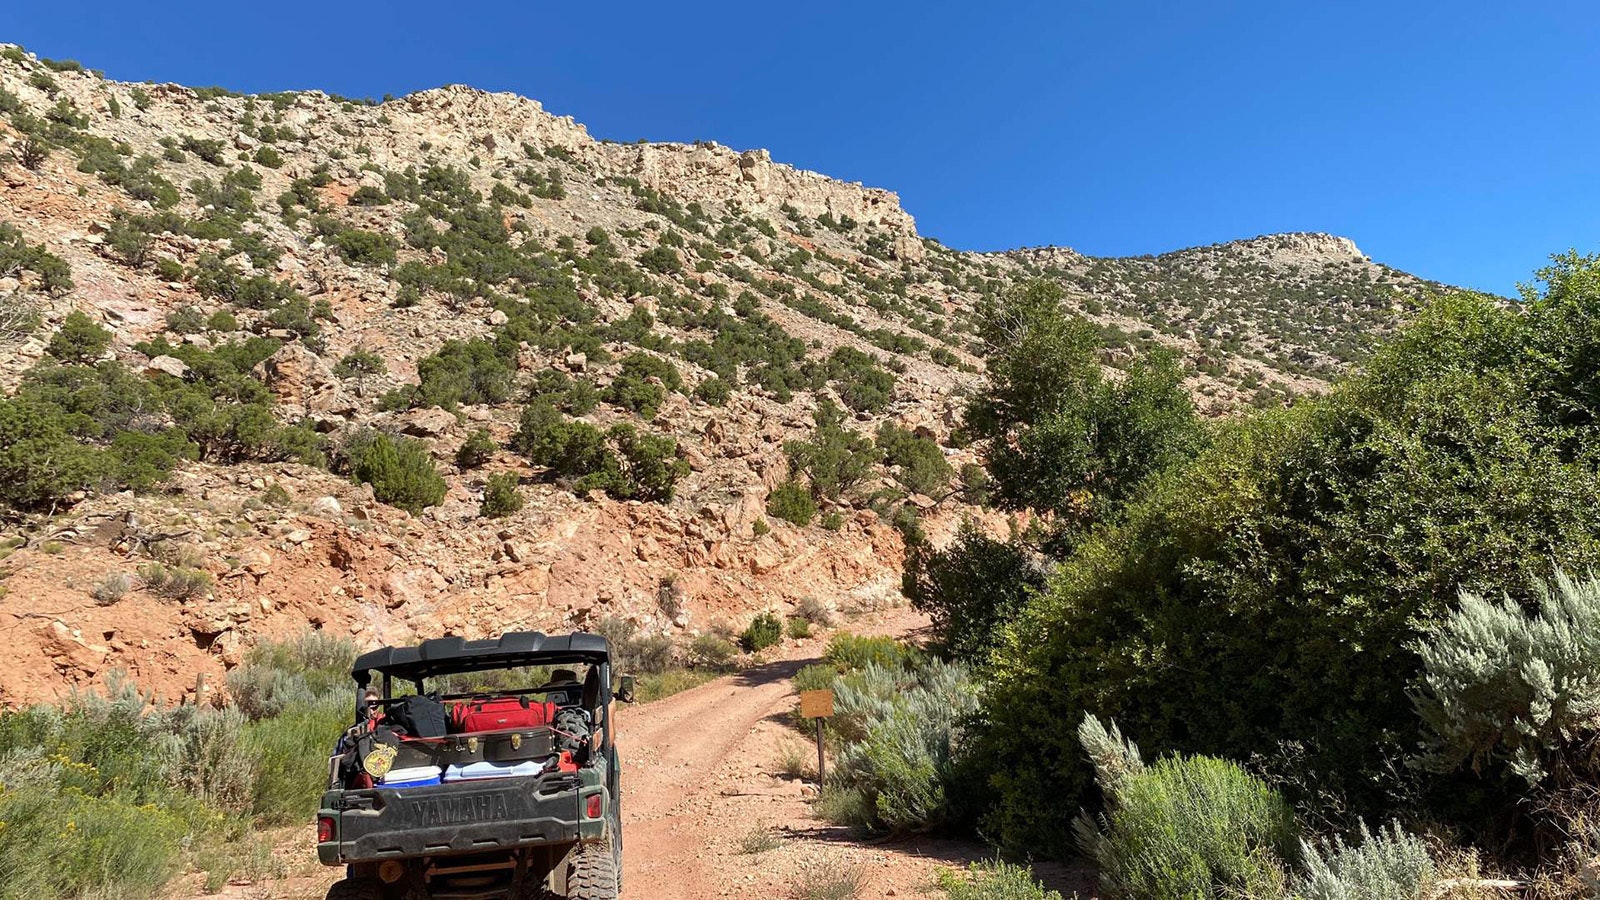 The real Armpit experience requires a four-wheel drive up John Blue Canyon.